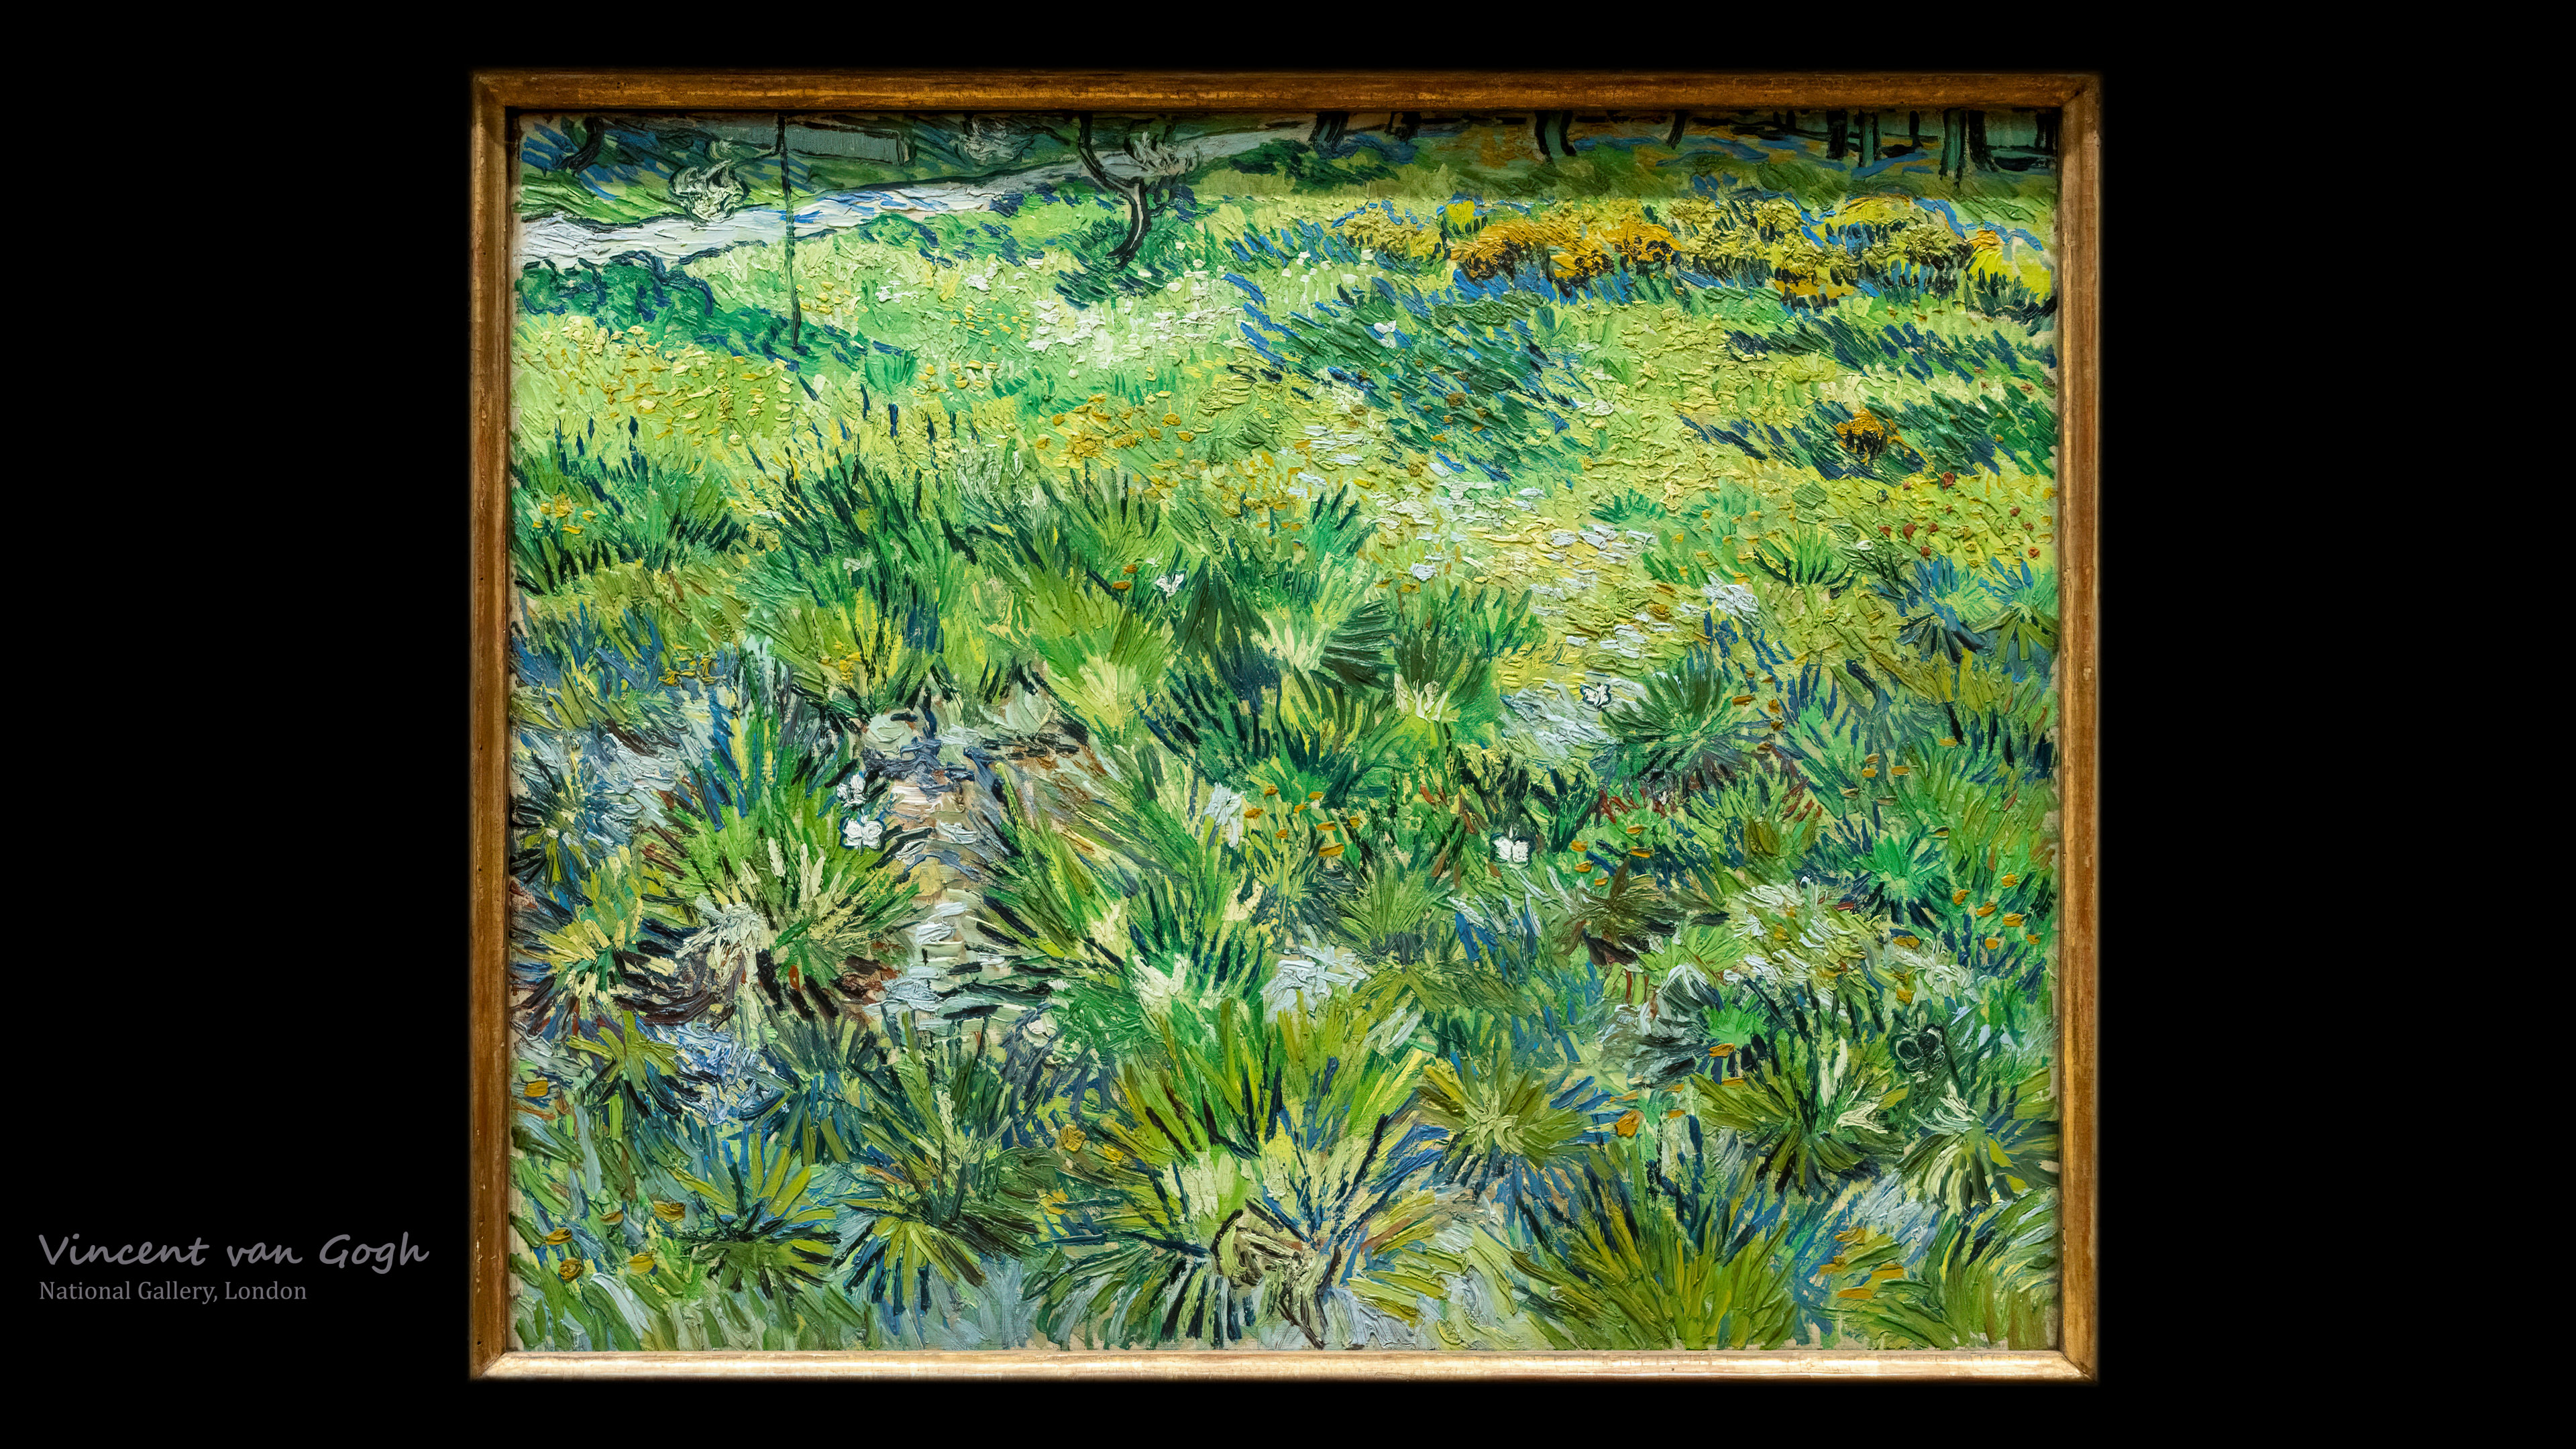 Bring the joy and vibrancy of spring to your screen with Meadow with Butterflies wallpaper, featuring the colorful and lively scene of a meadow full of flowers and butterflies that Van Gogh painted in 1889.